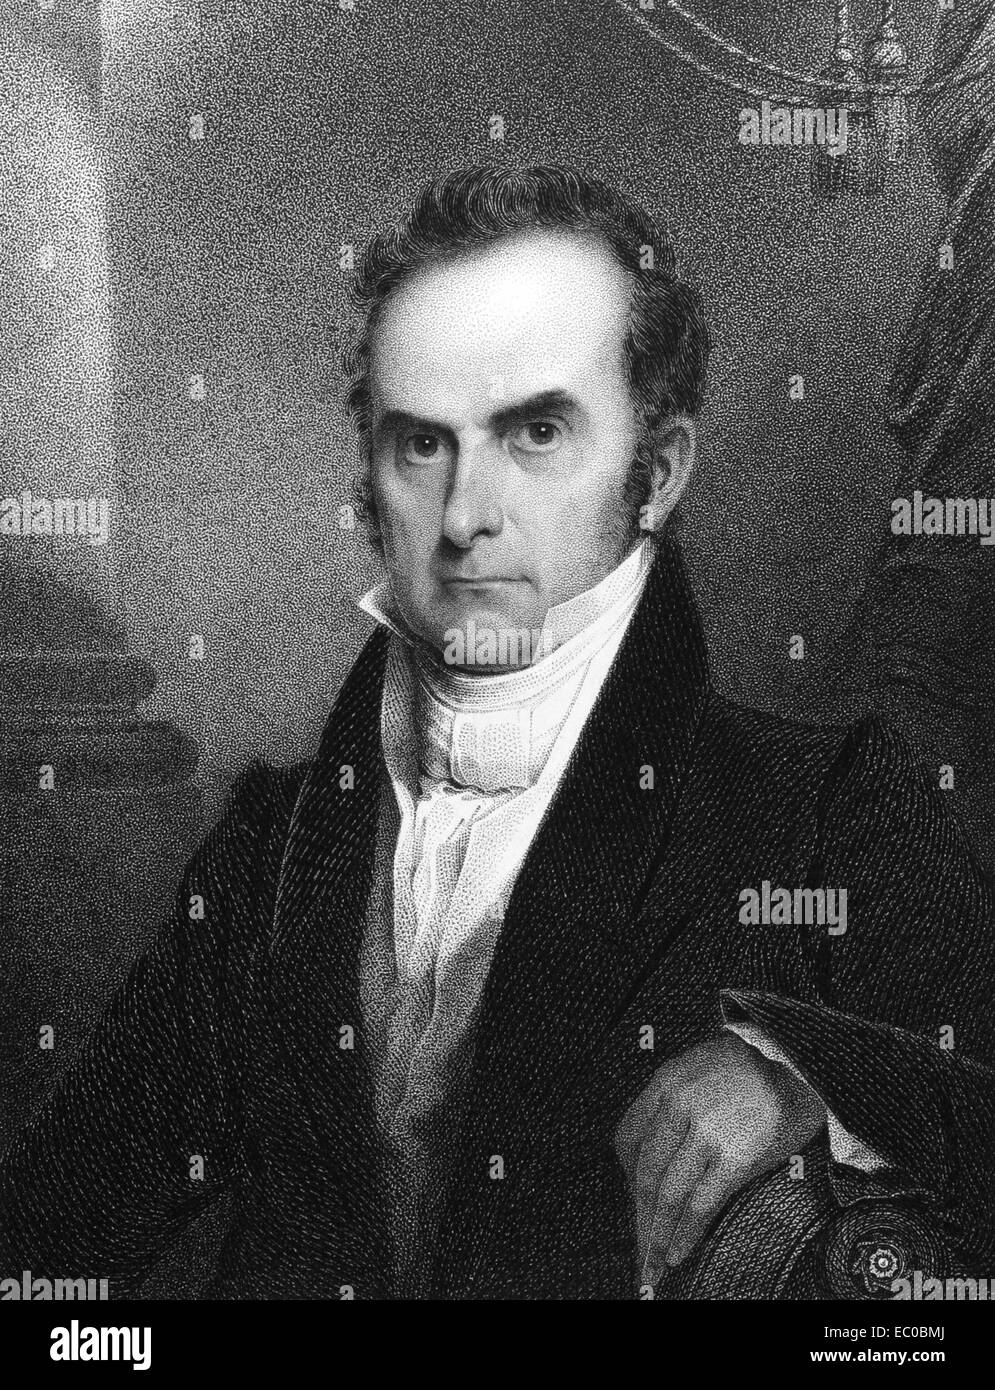 Daniel Webster (1782-1852) on engraving from 1834. Leading American statesman and senator. Stock Photo